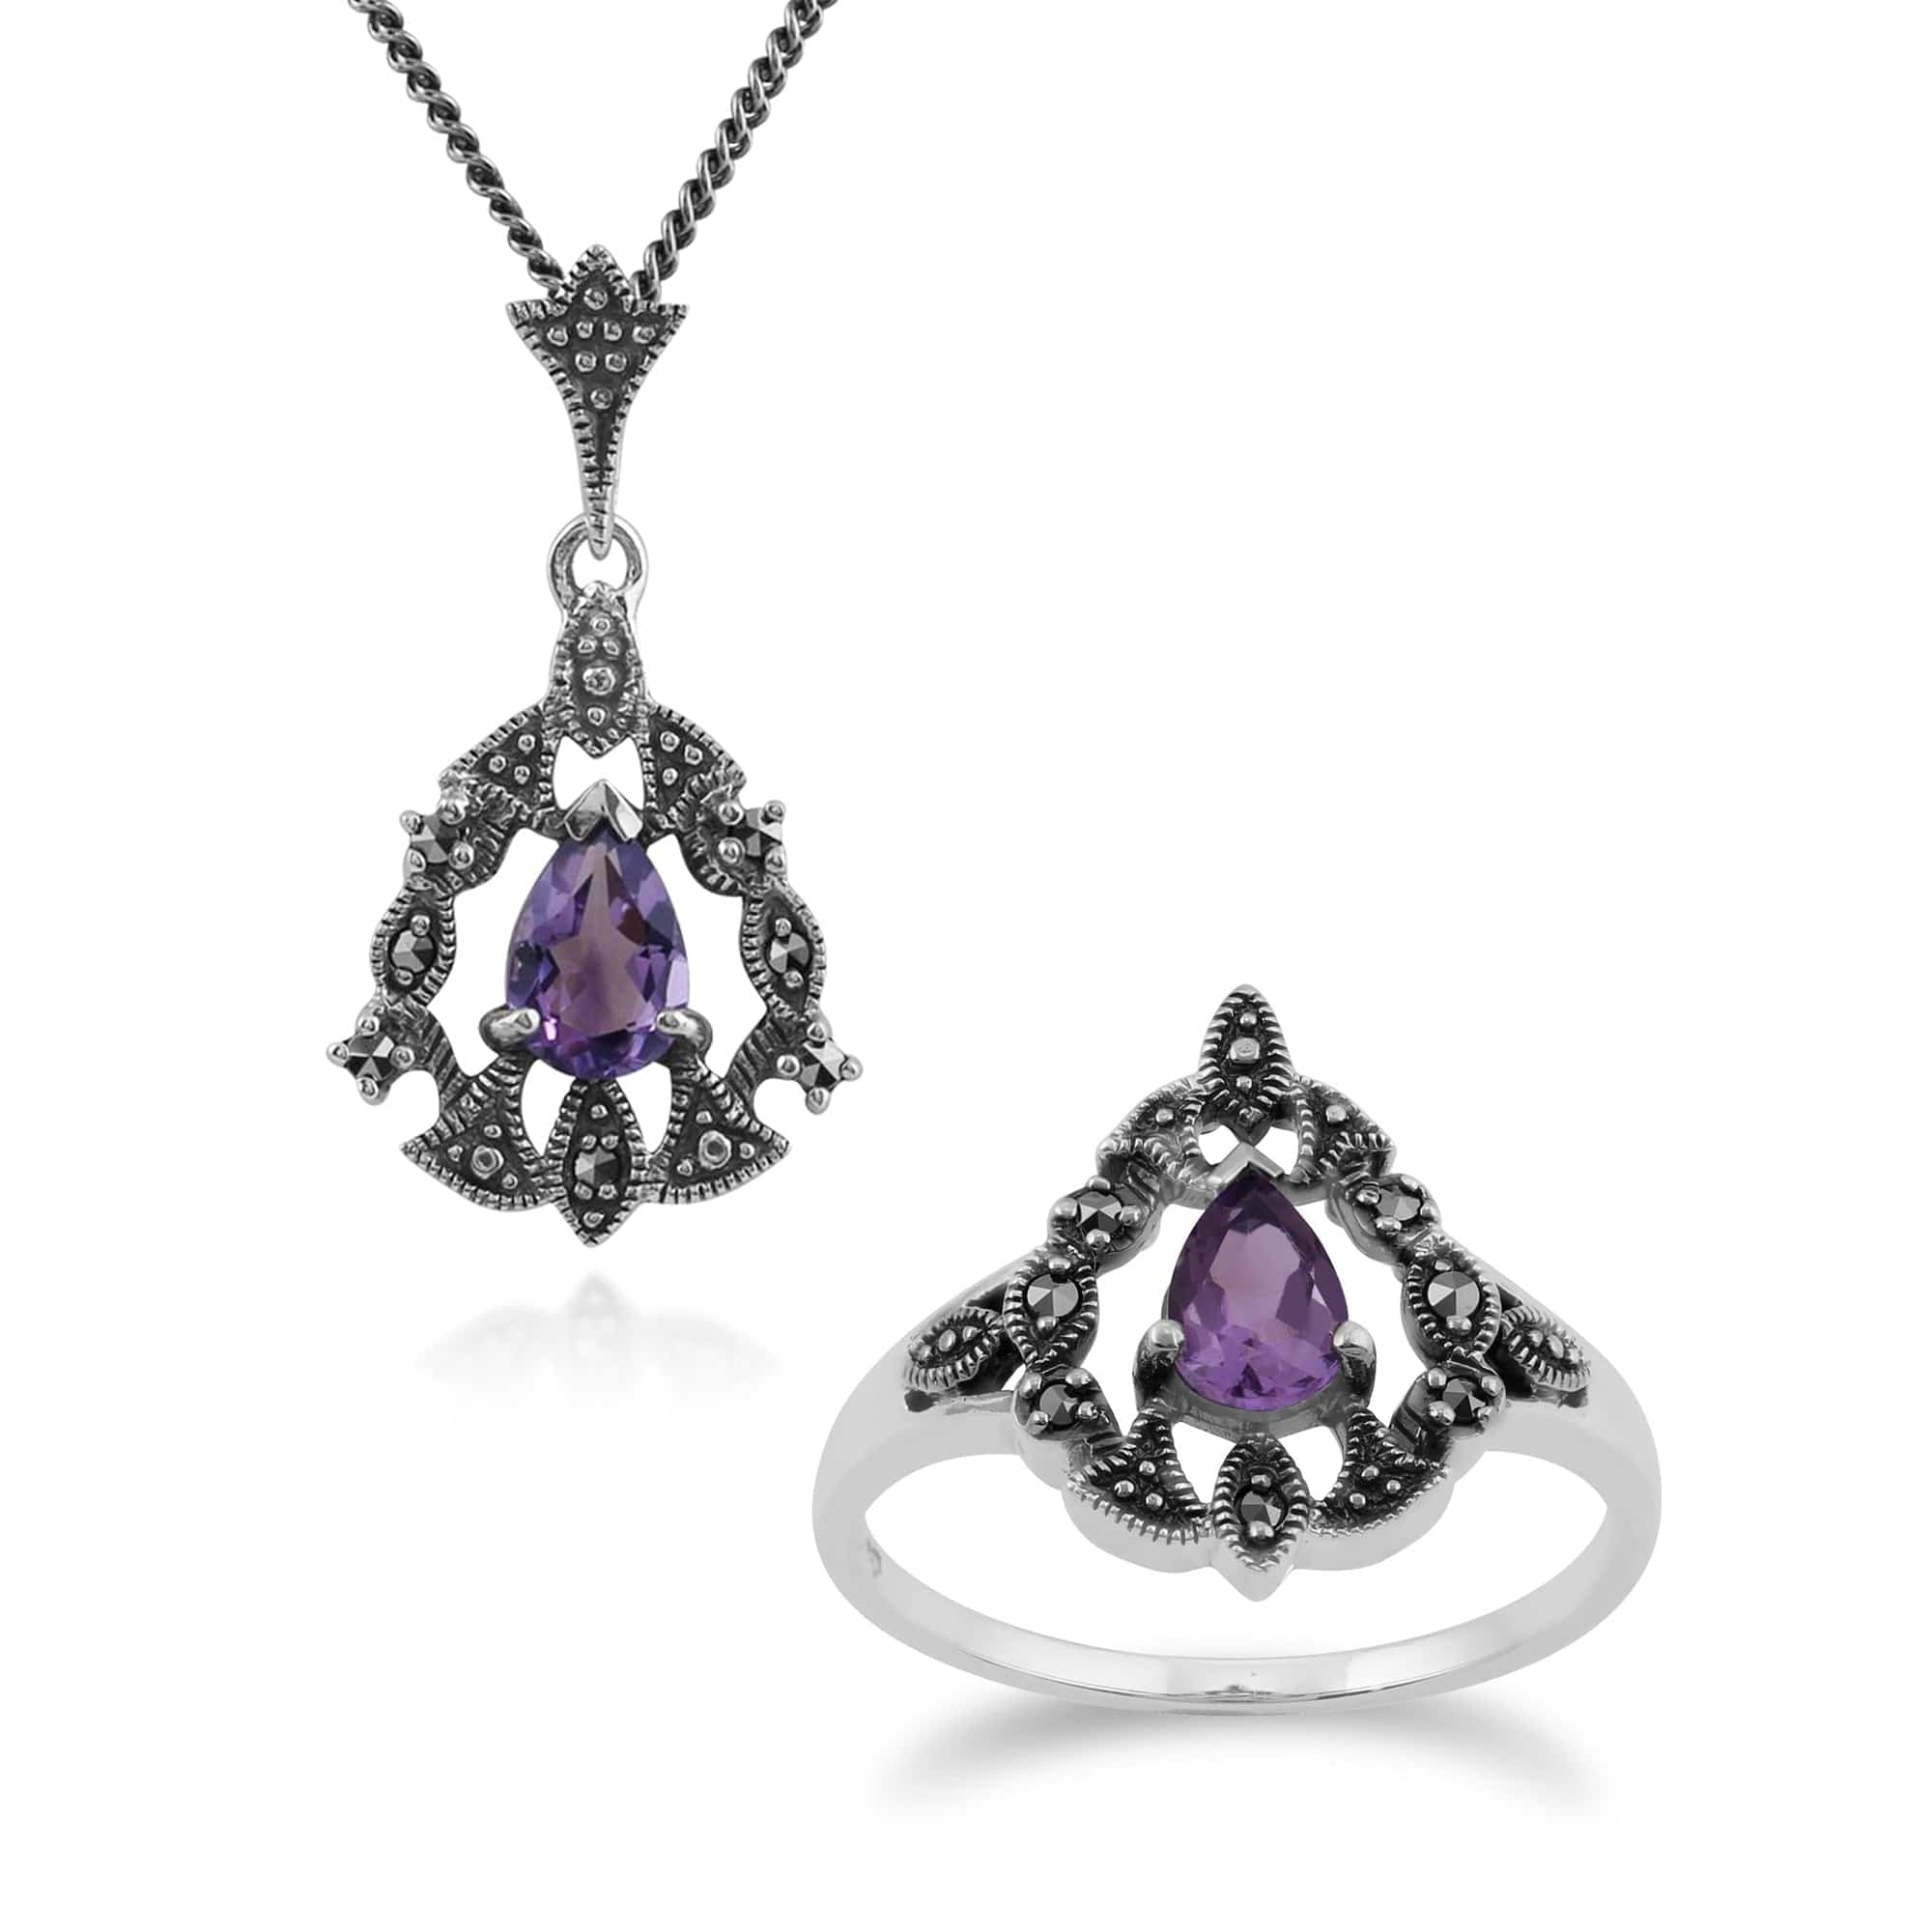 214N540202925-214R507802925 Art Nouveau Style Pear Amethyst & Marcasite Garland Pendant & Ring Set in 925 Sterling Silver 1